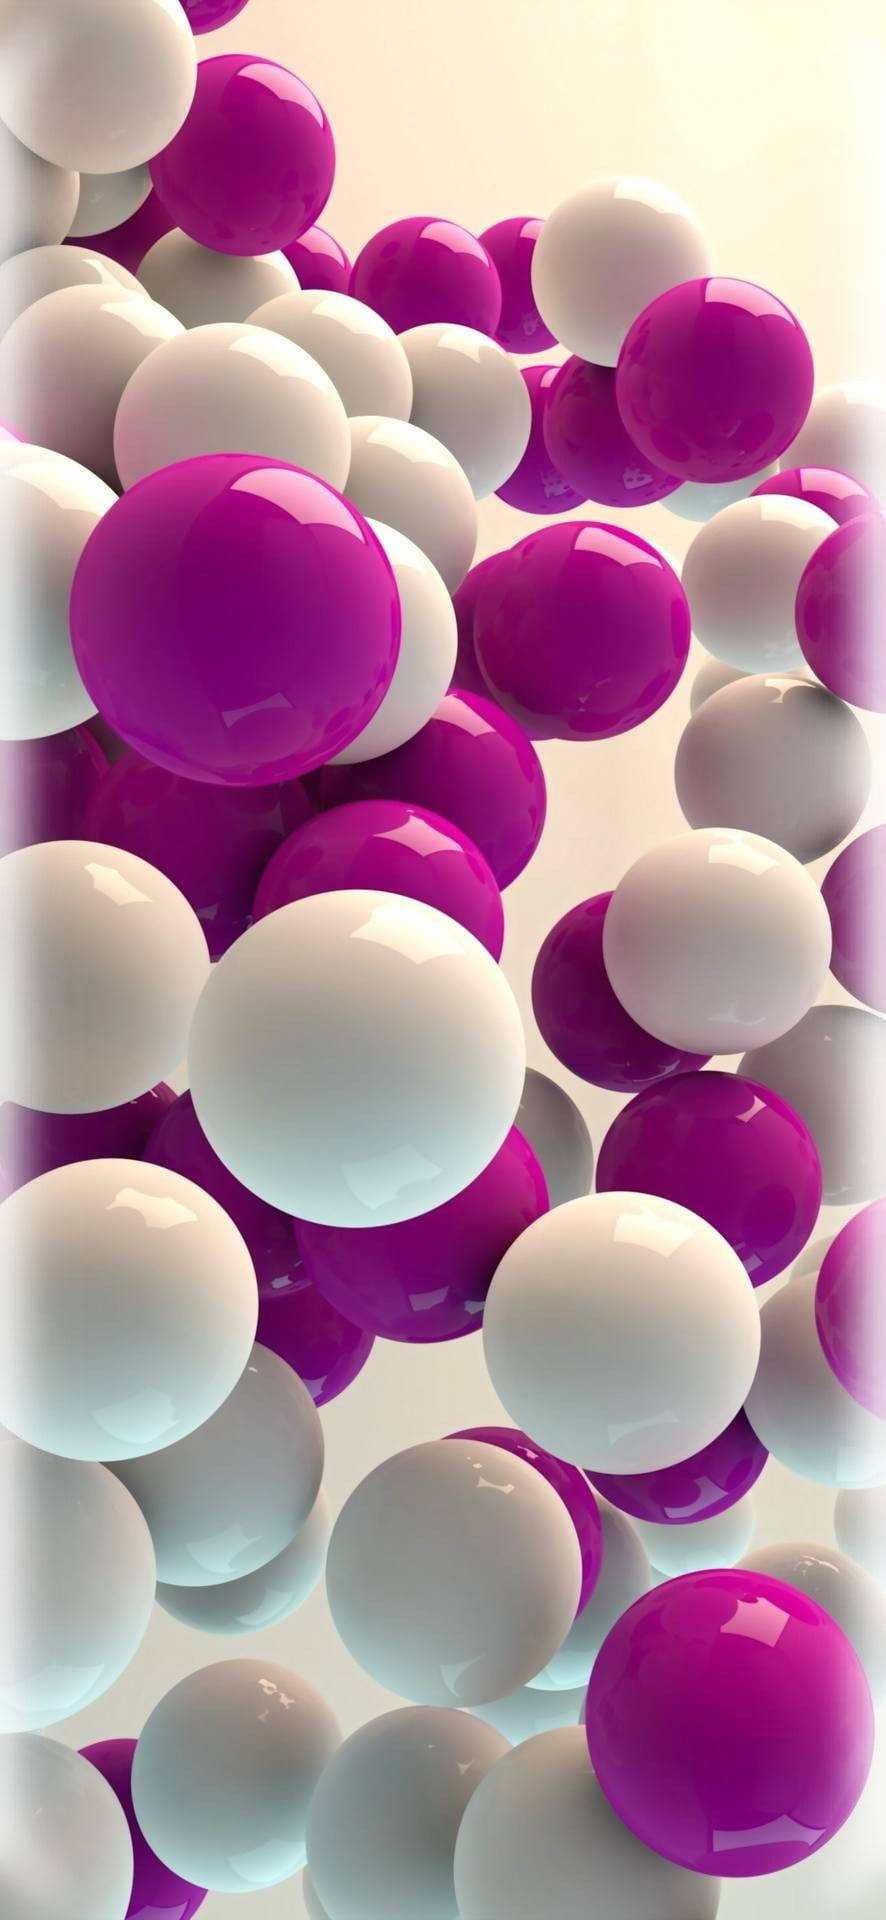 Samsung Galaxy S20 Floating In A Mesmerizing Background Of White And Purple Spheres Background